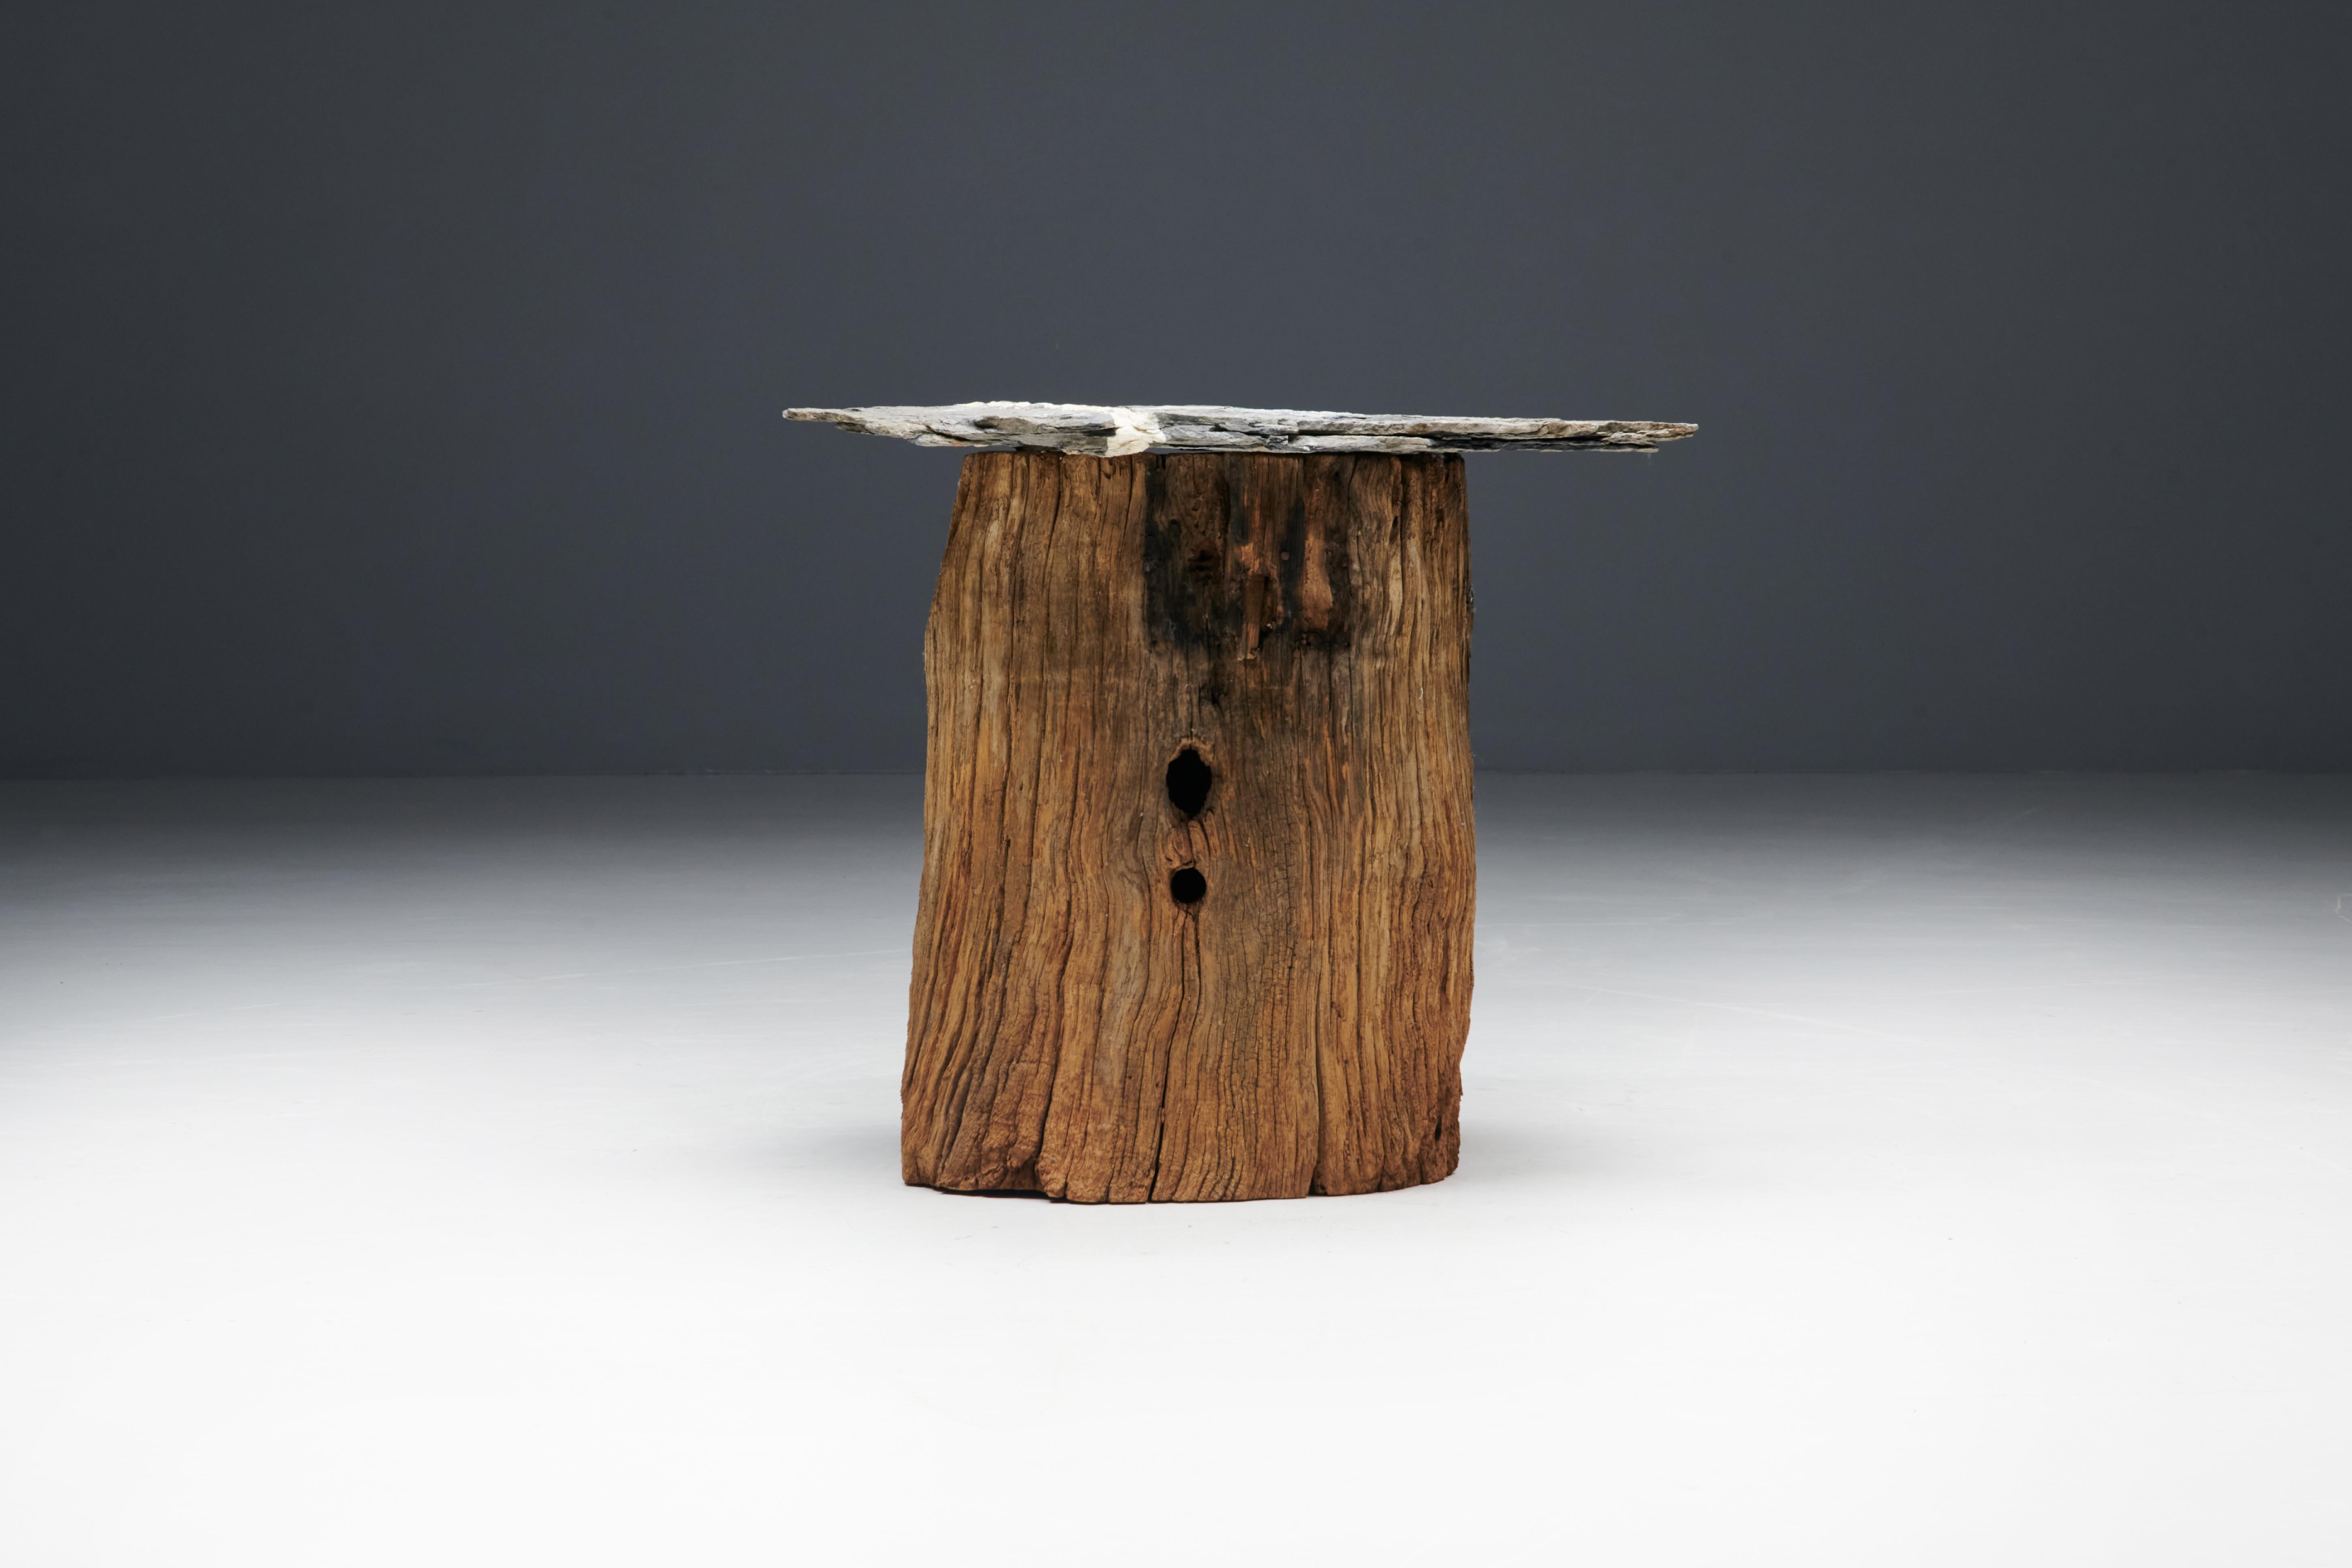 Folk art side table, handcrafted from a solid tree trunk with a beautiful slate top. This side table is a harmonious fusion of natural beauty and functional design. We have matching side tables and storage pieces available in other offerings, each a